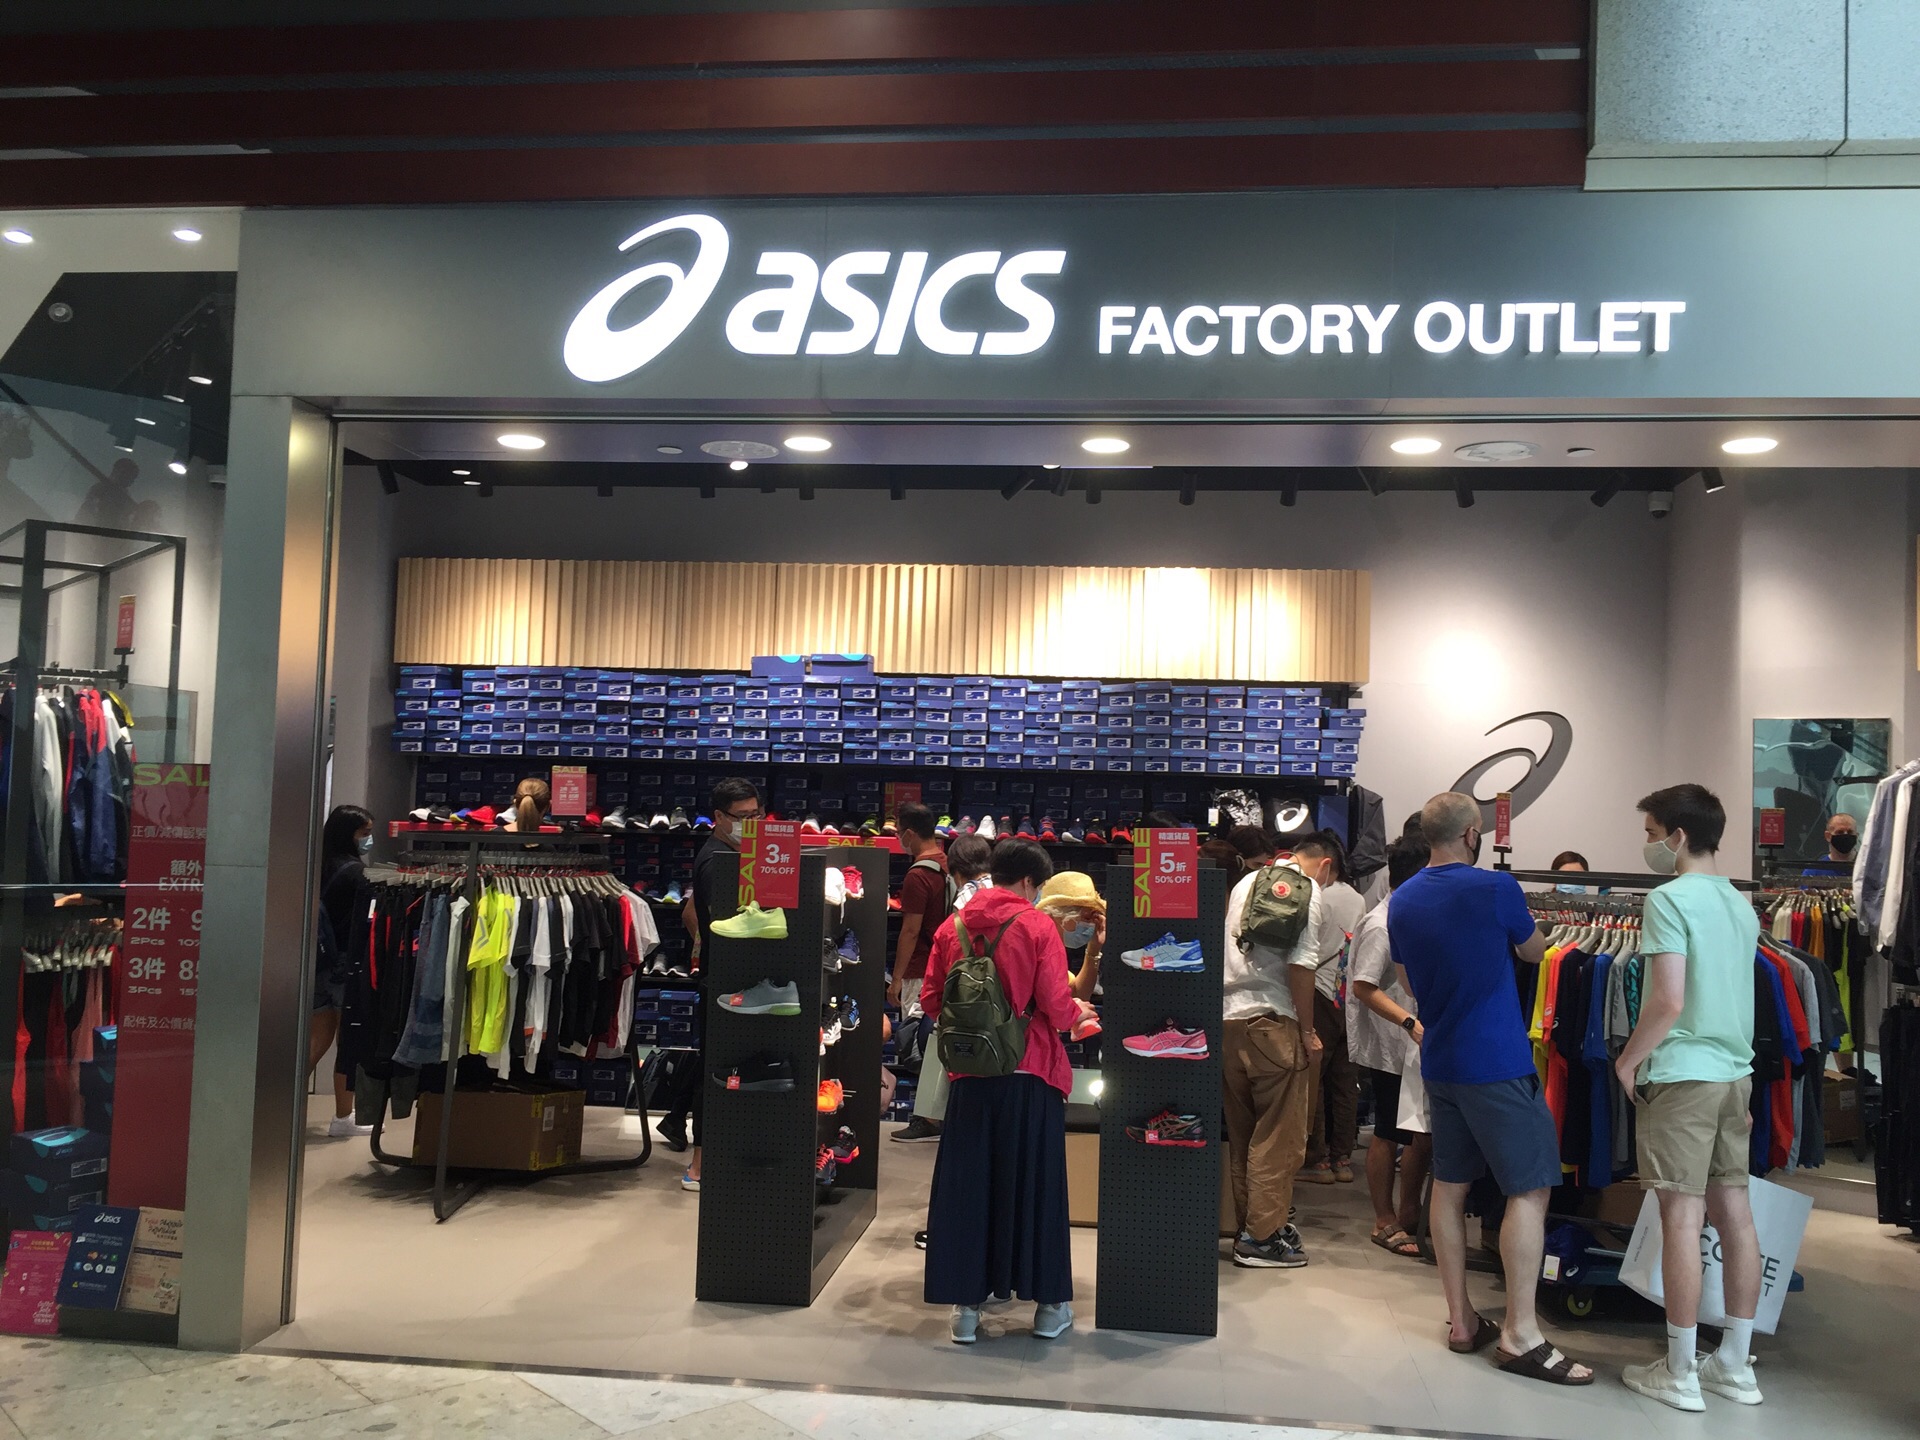 Shopping itineraries in Asics Factory Outlet in 2023-05-25T17:00:00-07:00  (updated in 2023-05-25T17:00:00-07:00) - Trip.com